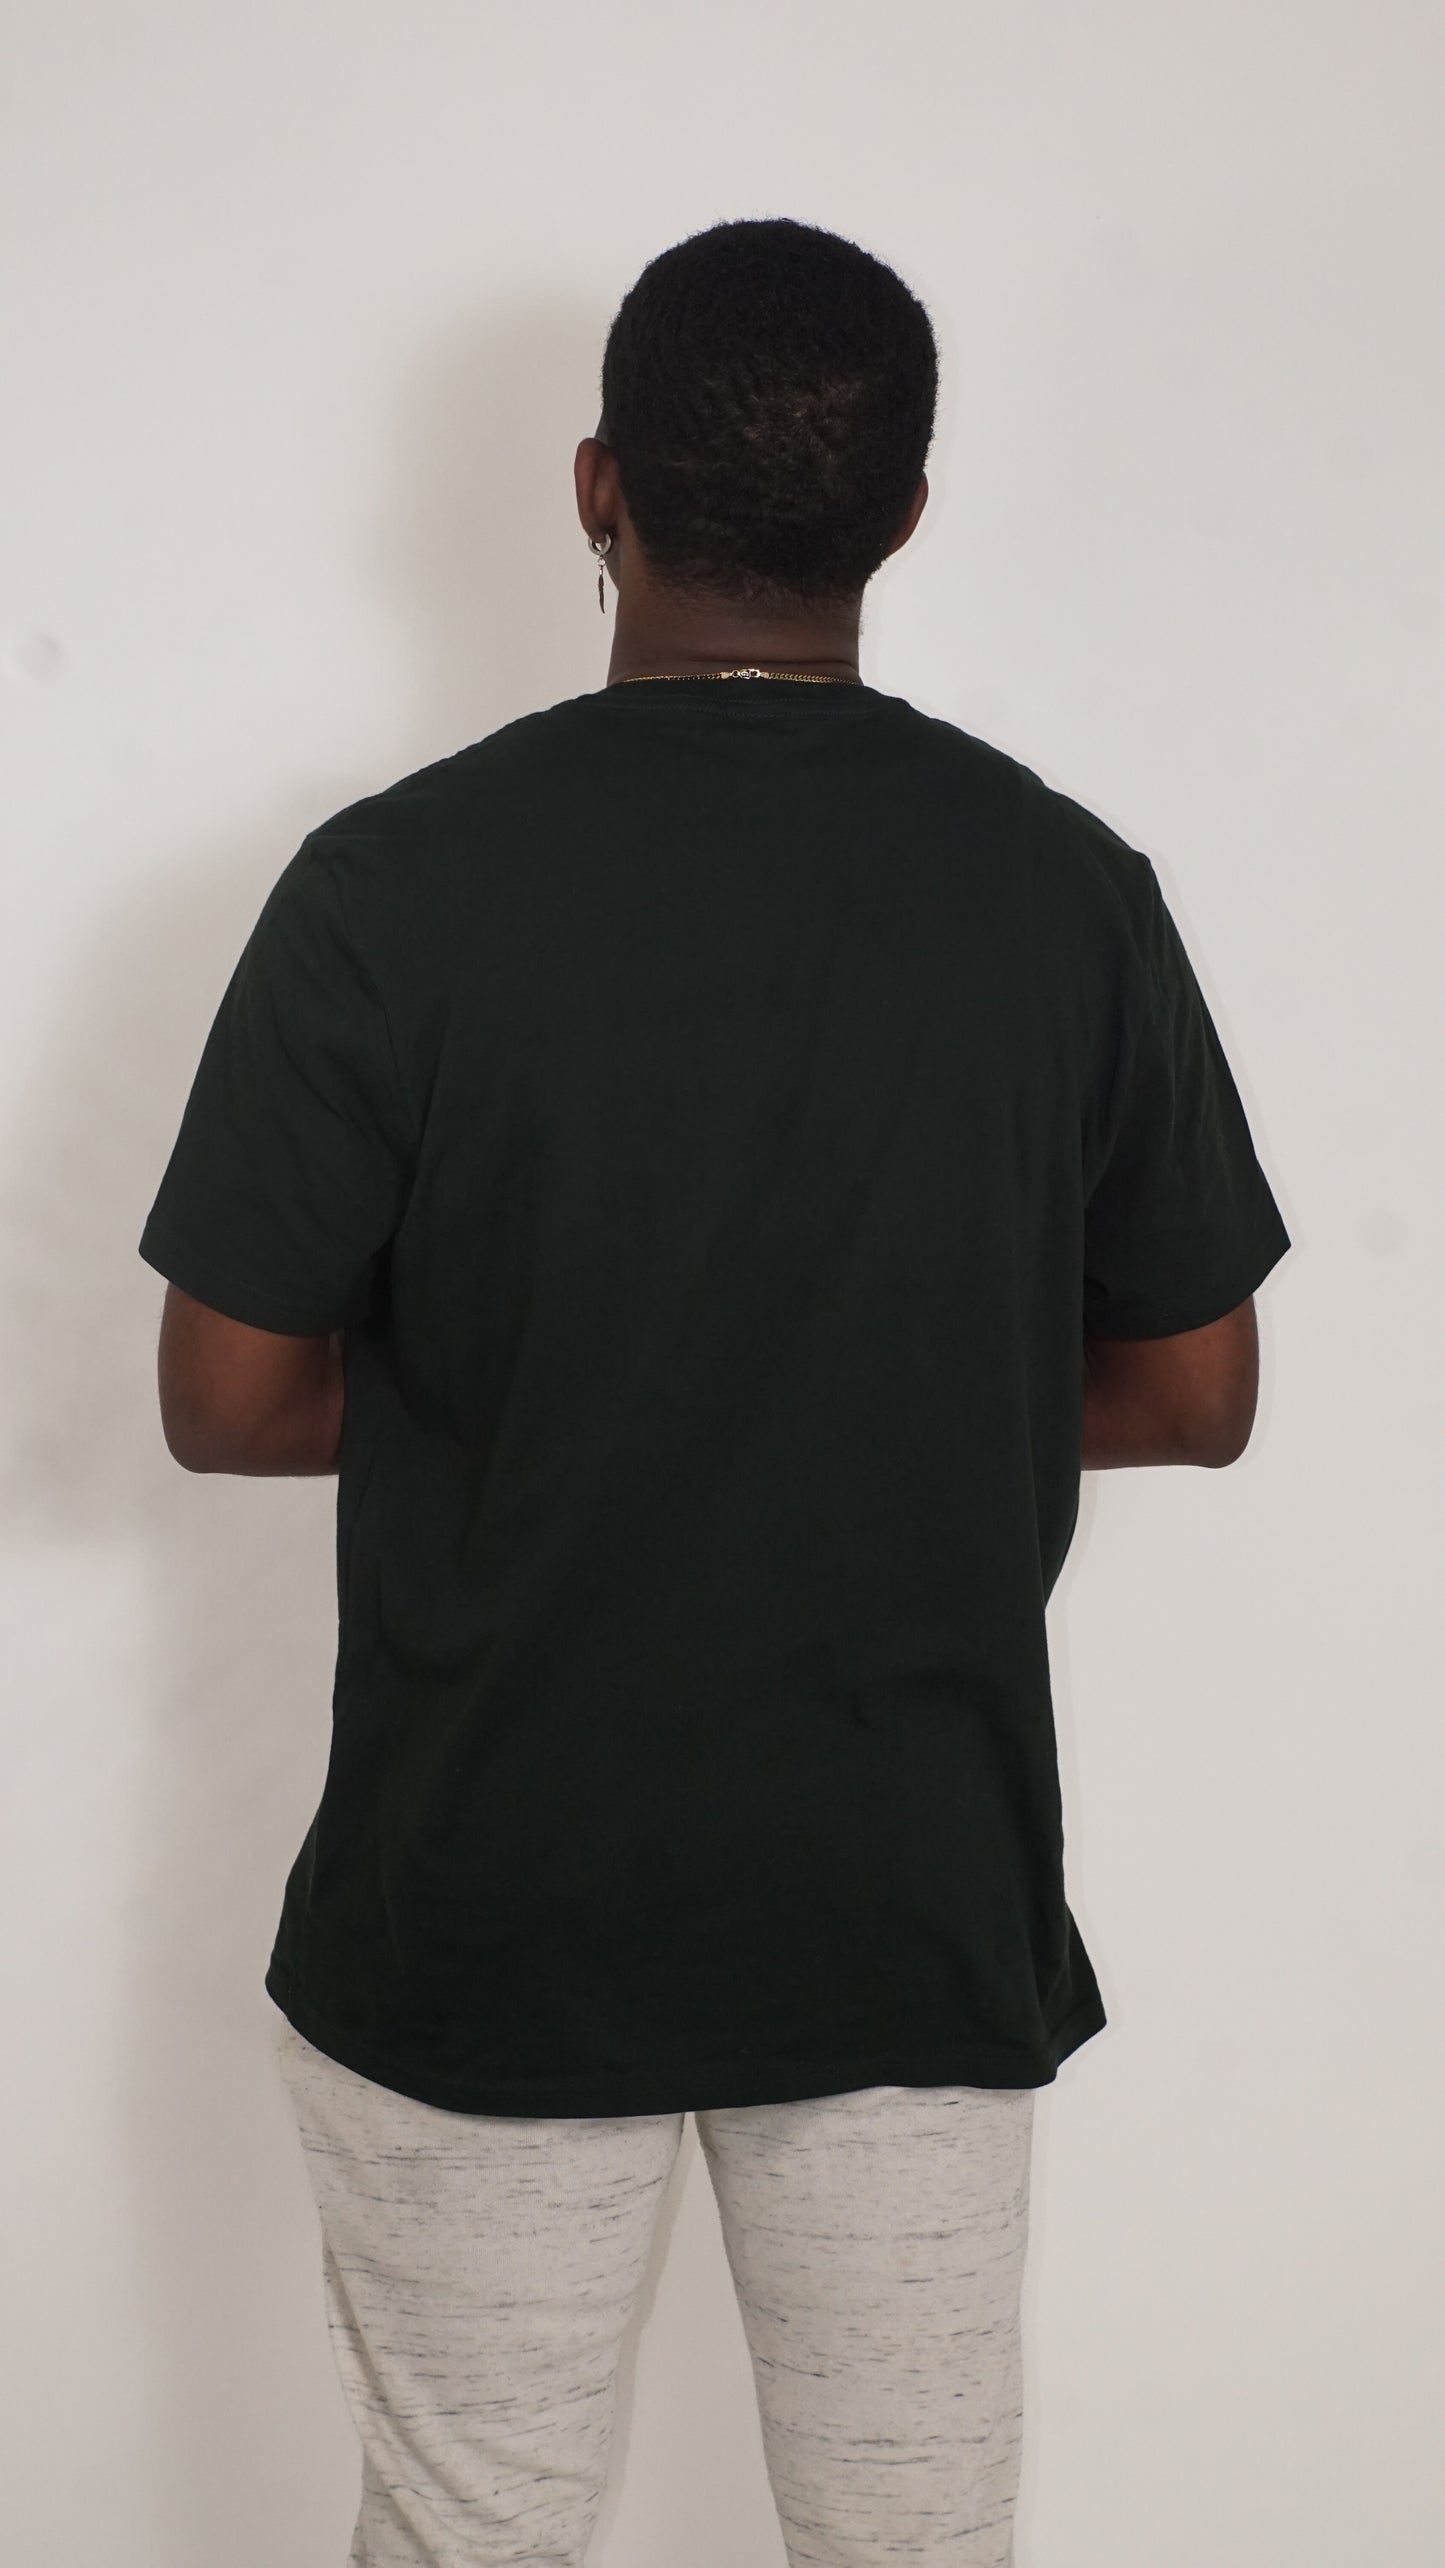 Spring Eclipse '04 Fit Tee